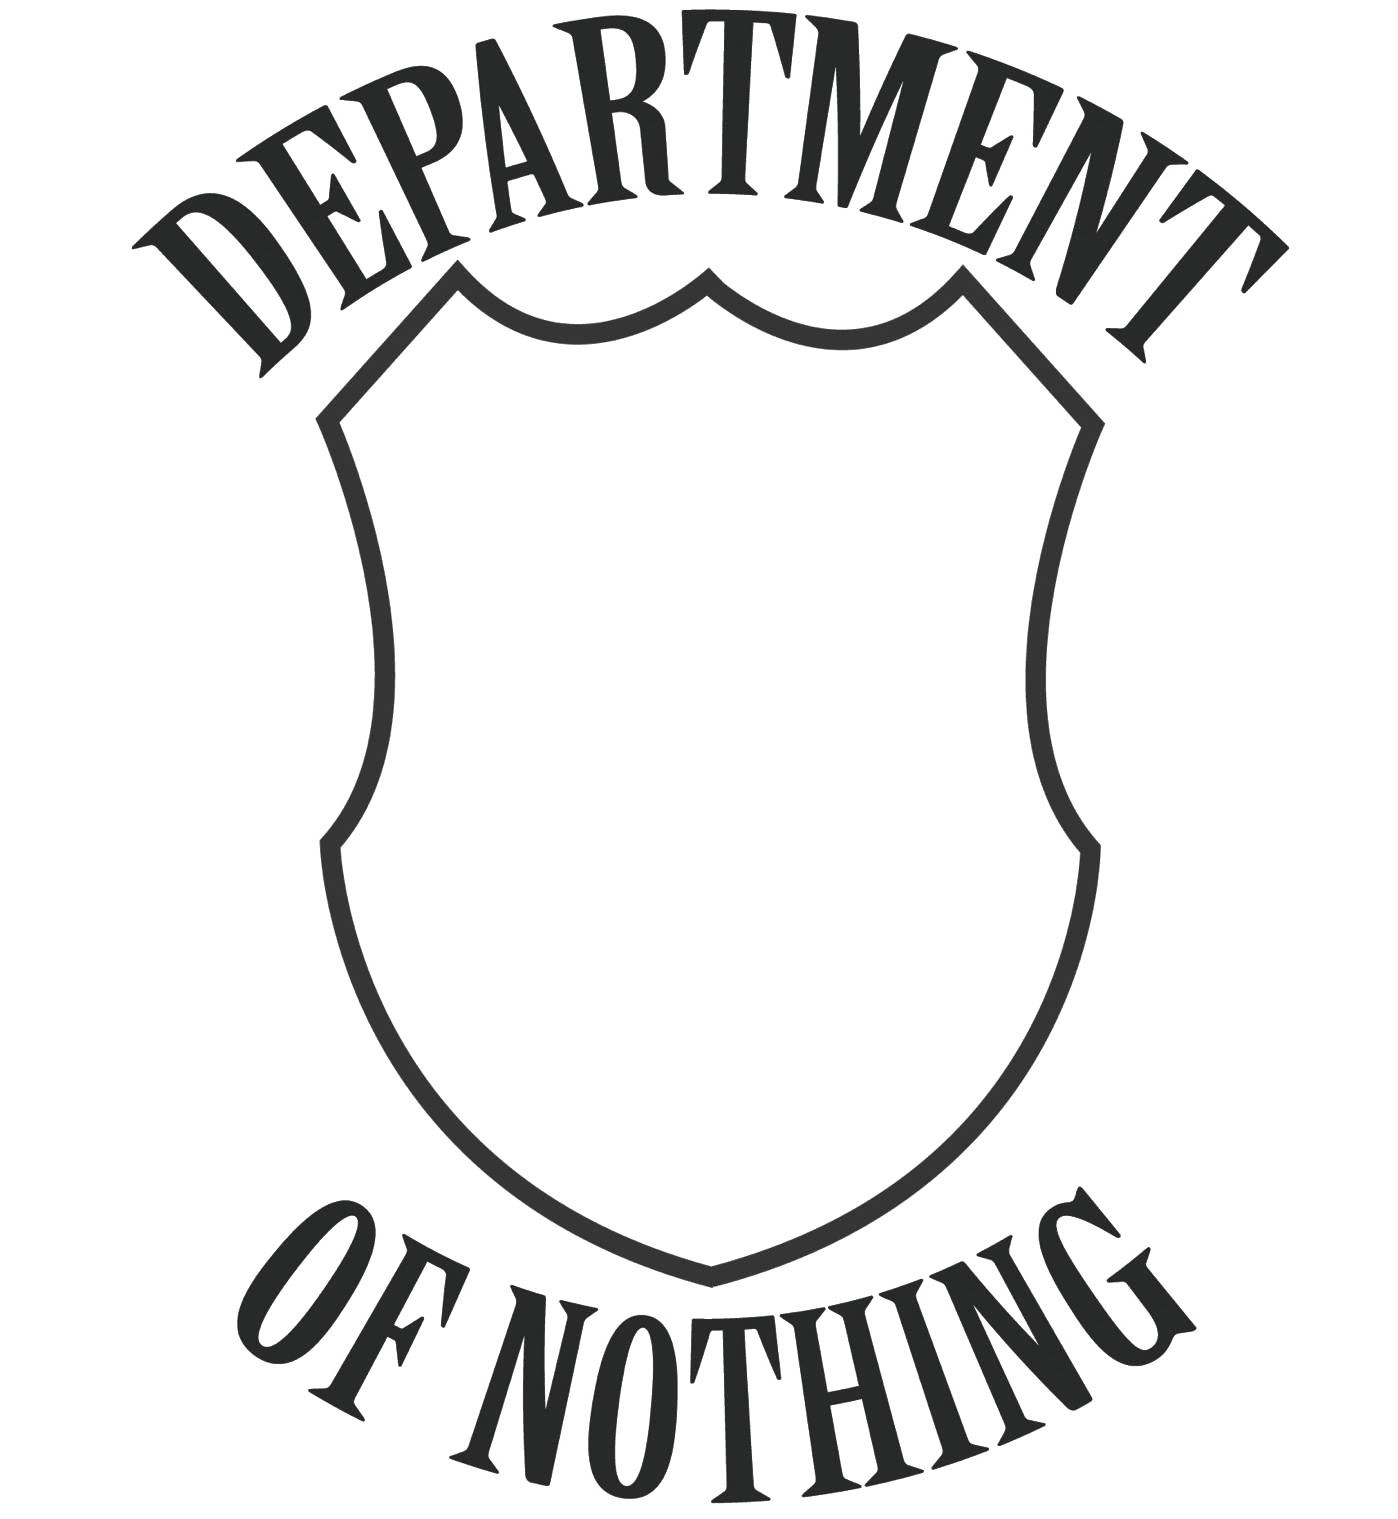 Department of Nothing